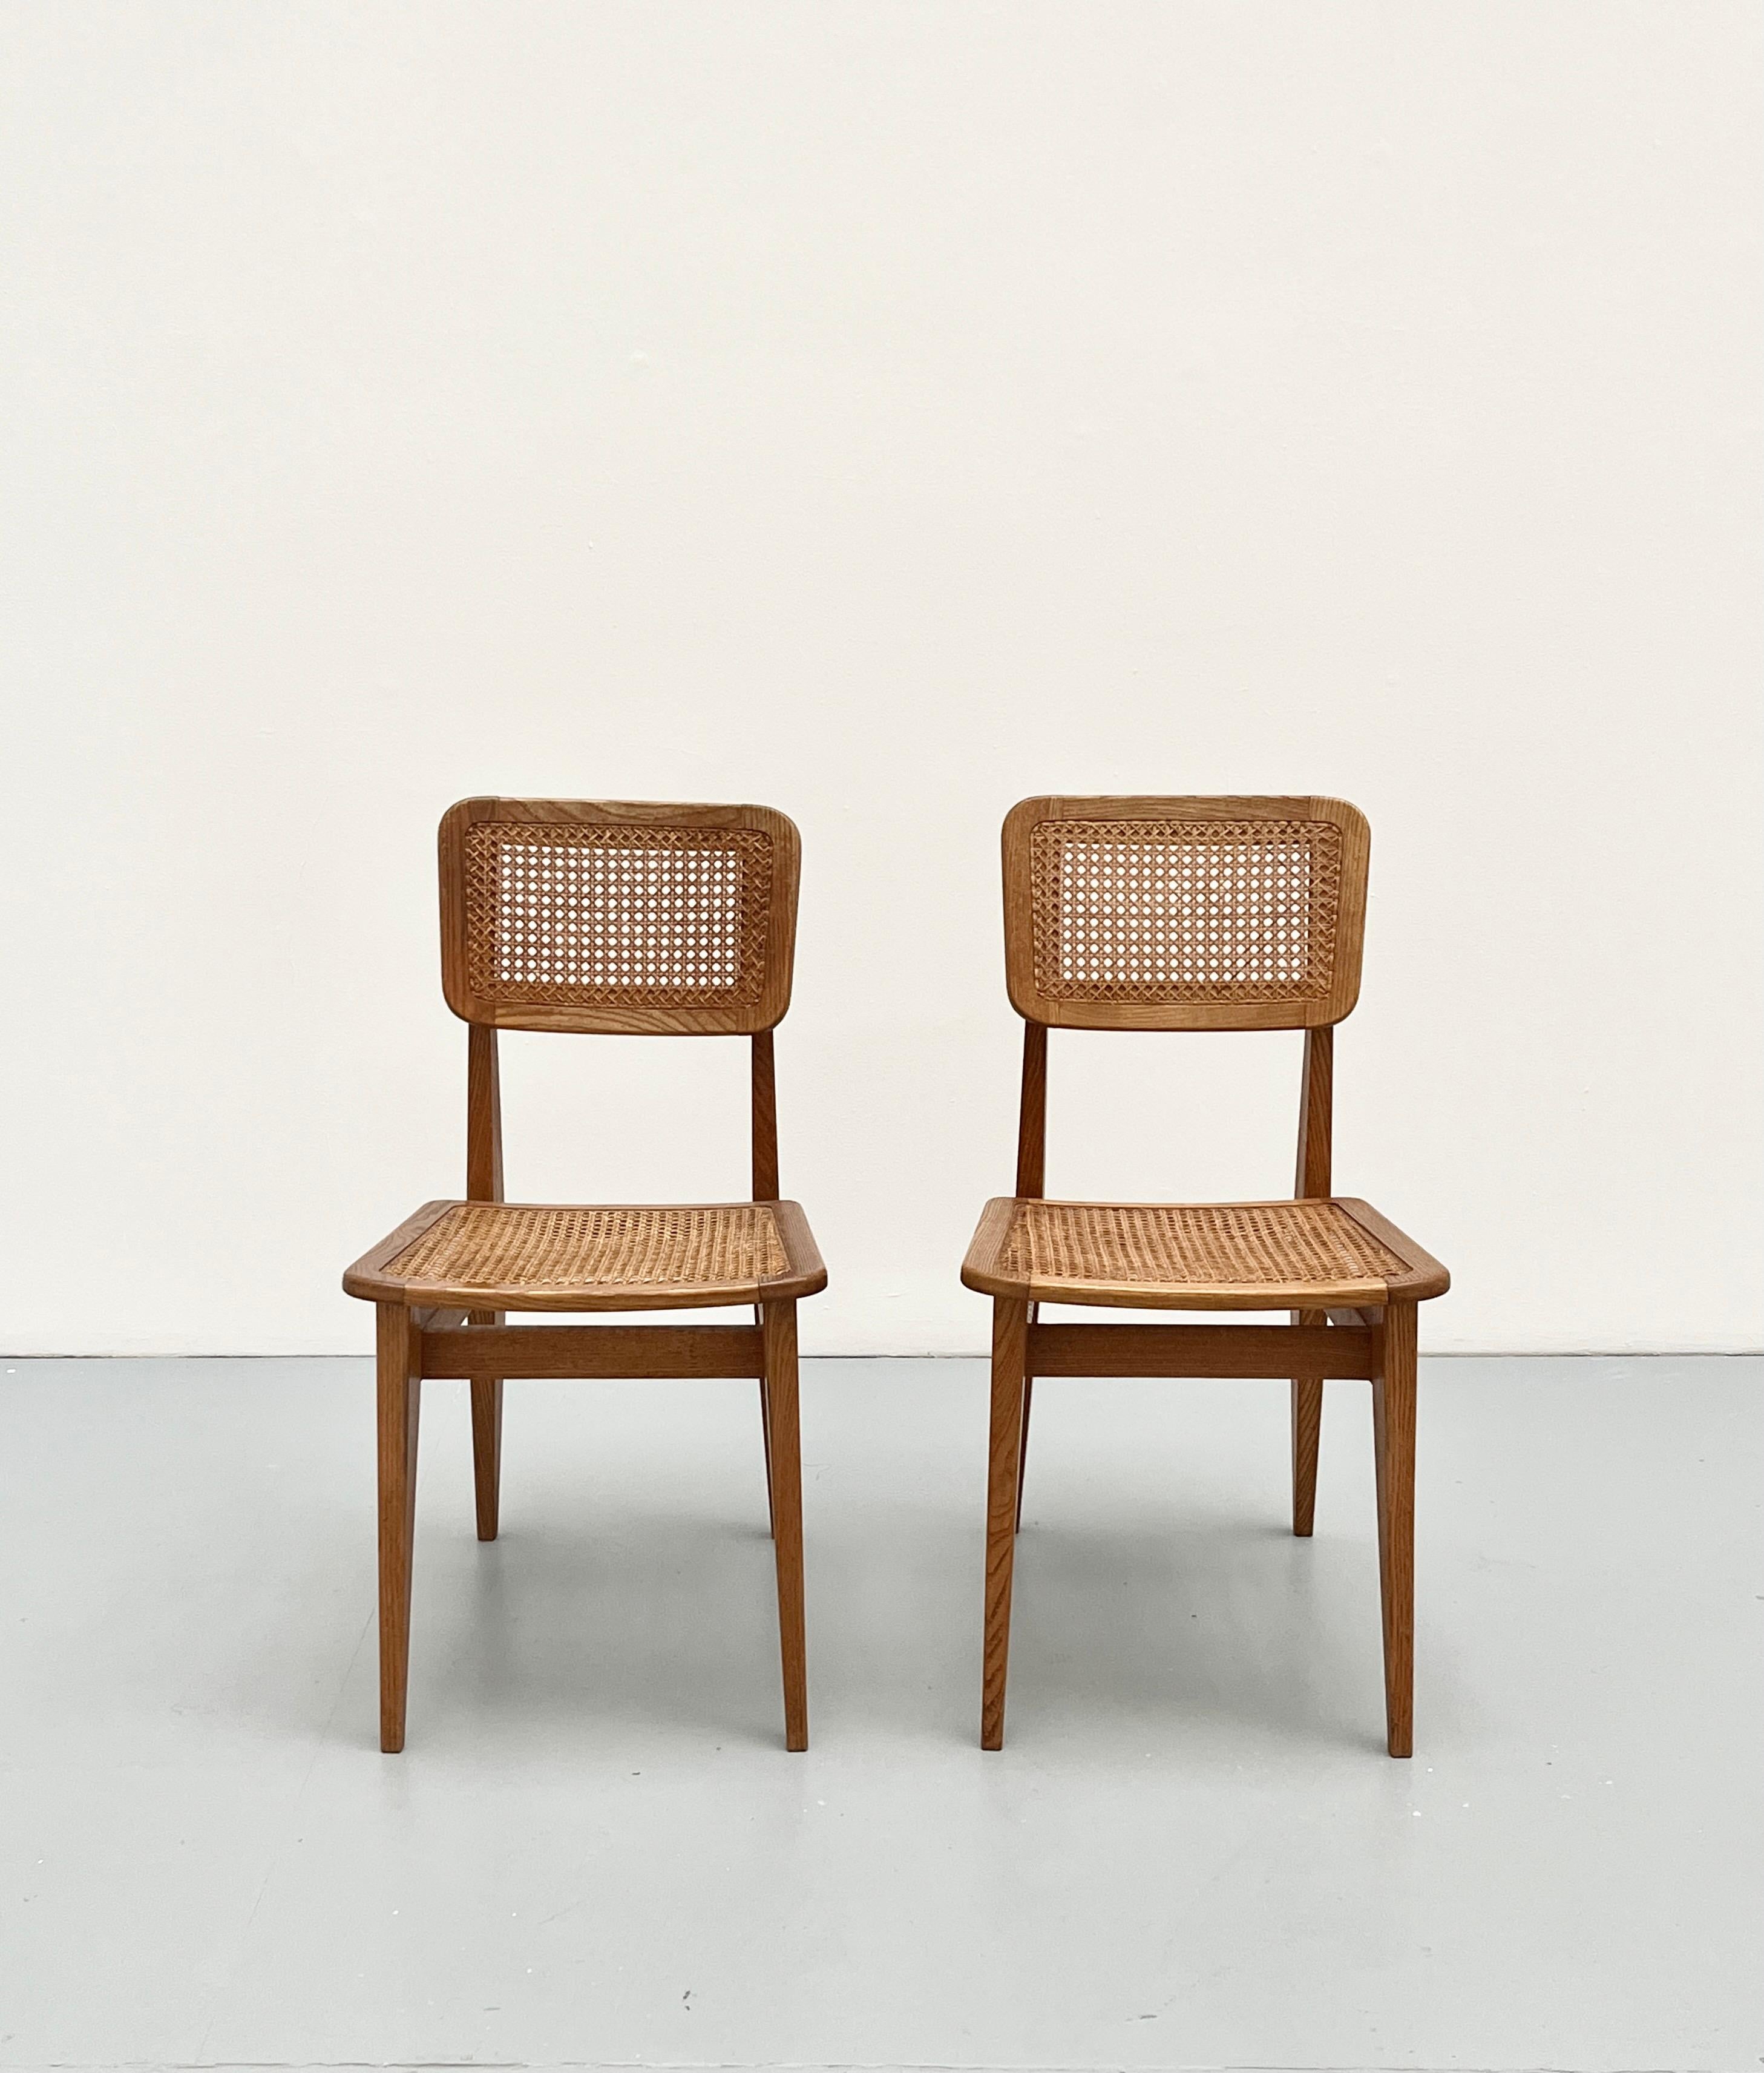 We are presenting 2 chairs, but we have 6 available.
Marcel Gascoin, born August 24, 1907 in Le Havre and died October 27, 1986 in Paris 13e1, was a decorator specializing in 